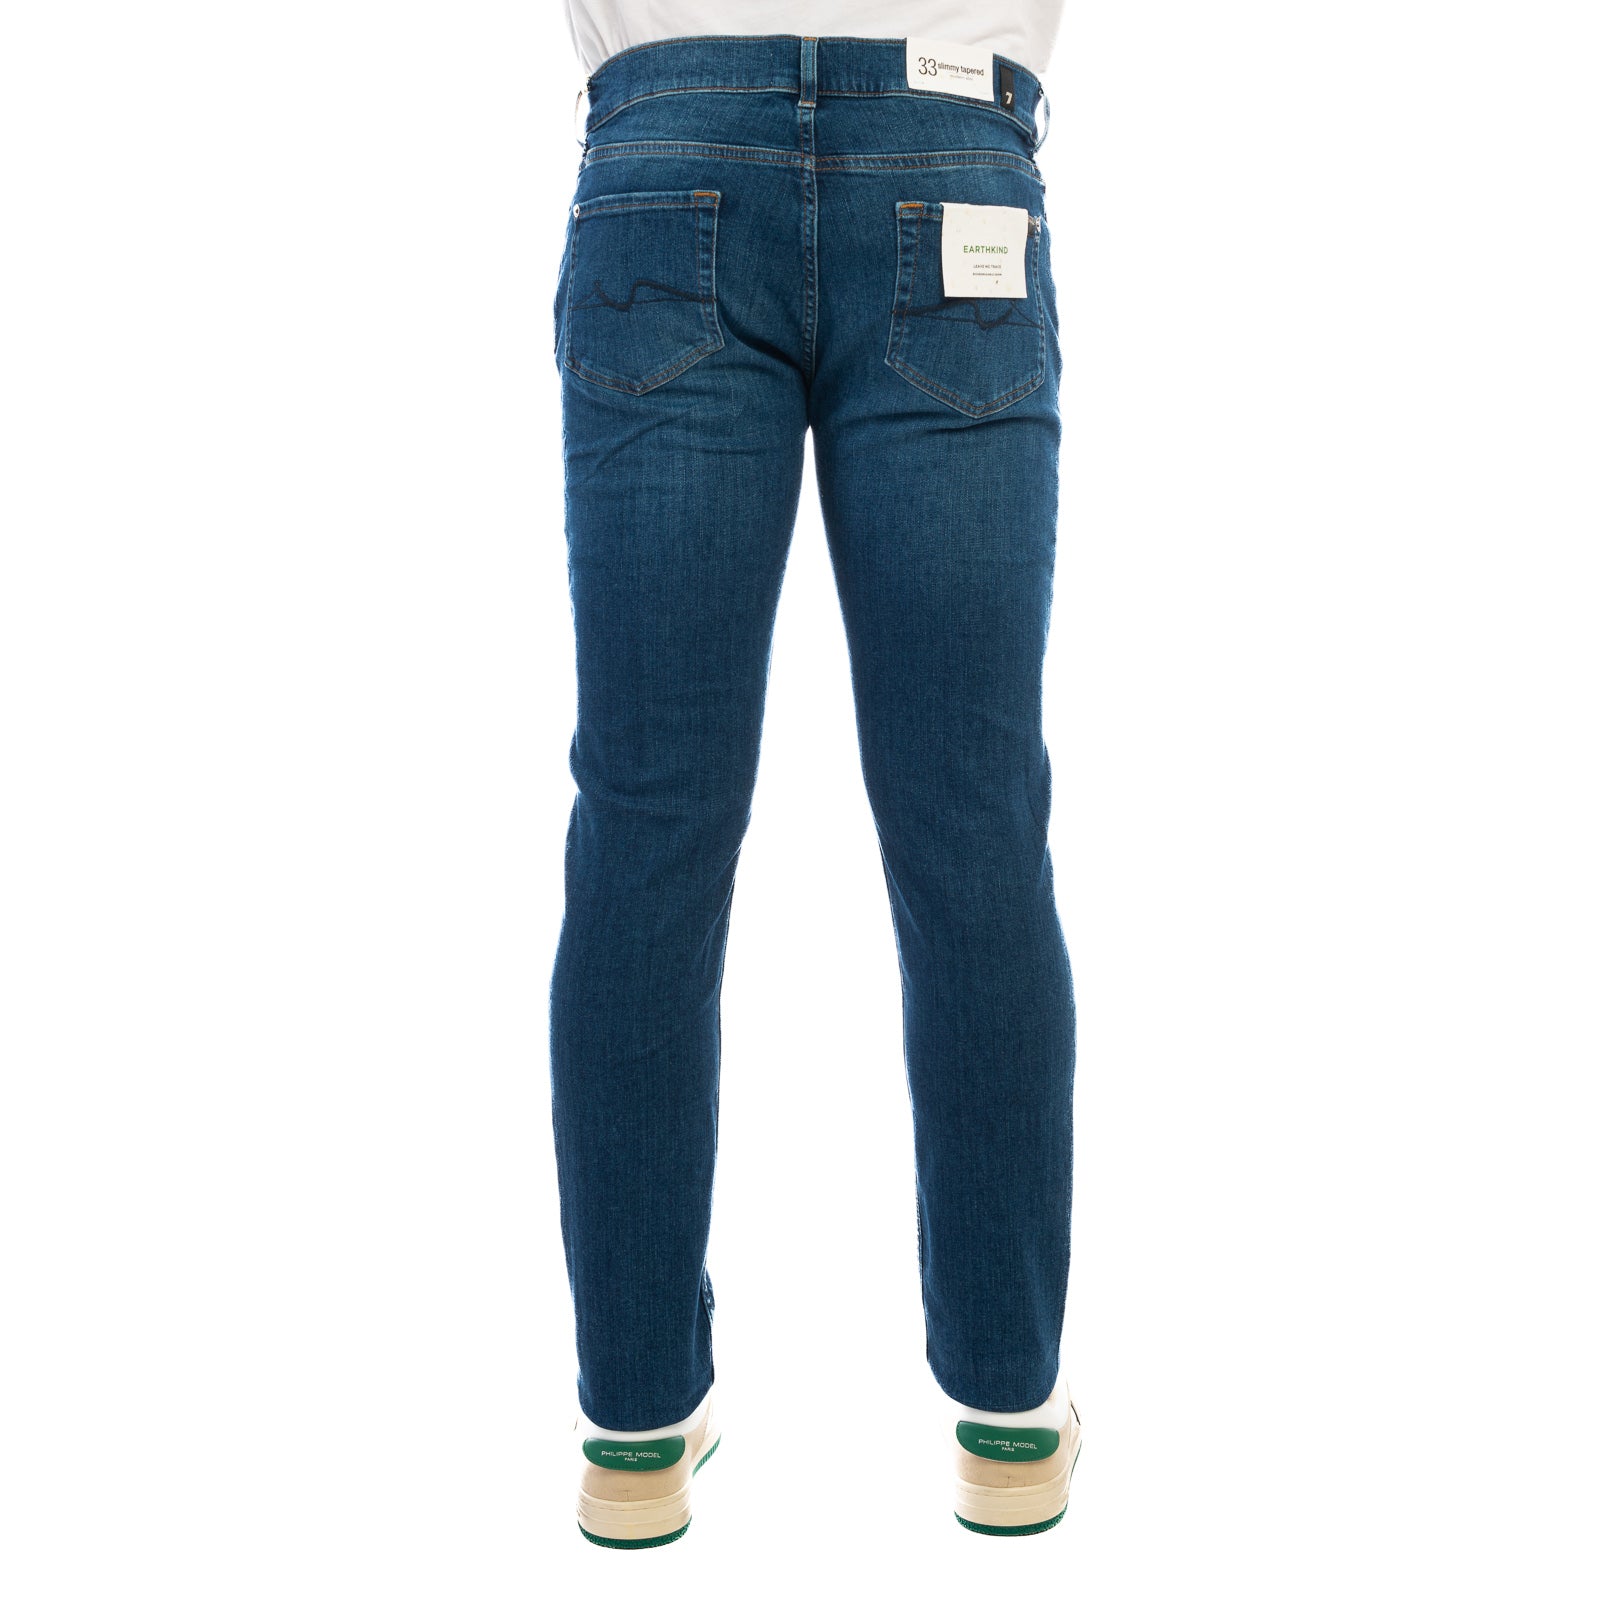 Jeans 7 FOR ALL MANKIND
Dark blue